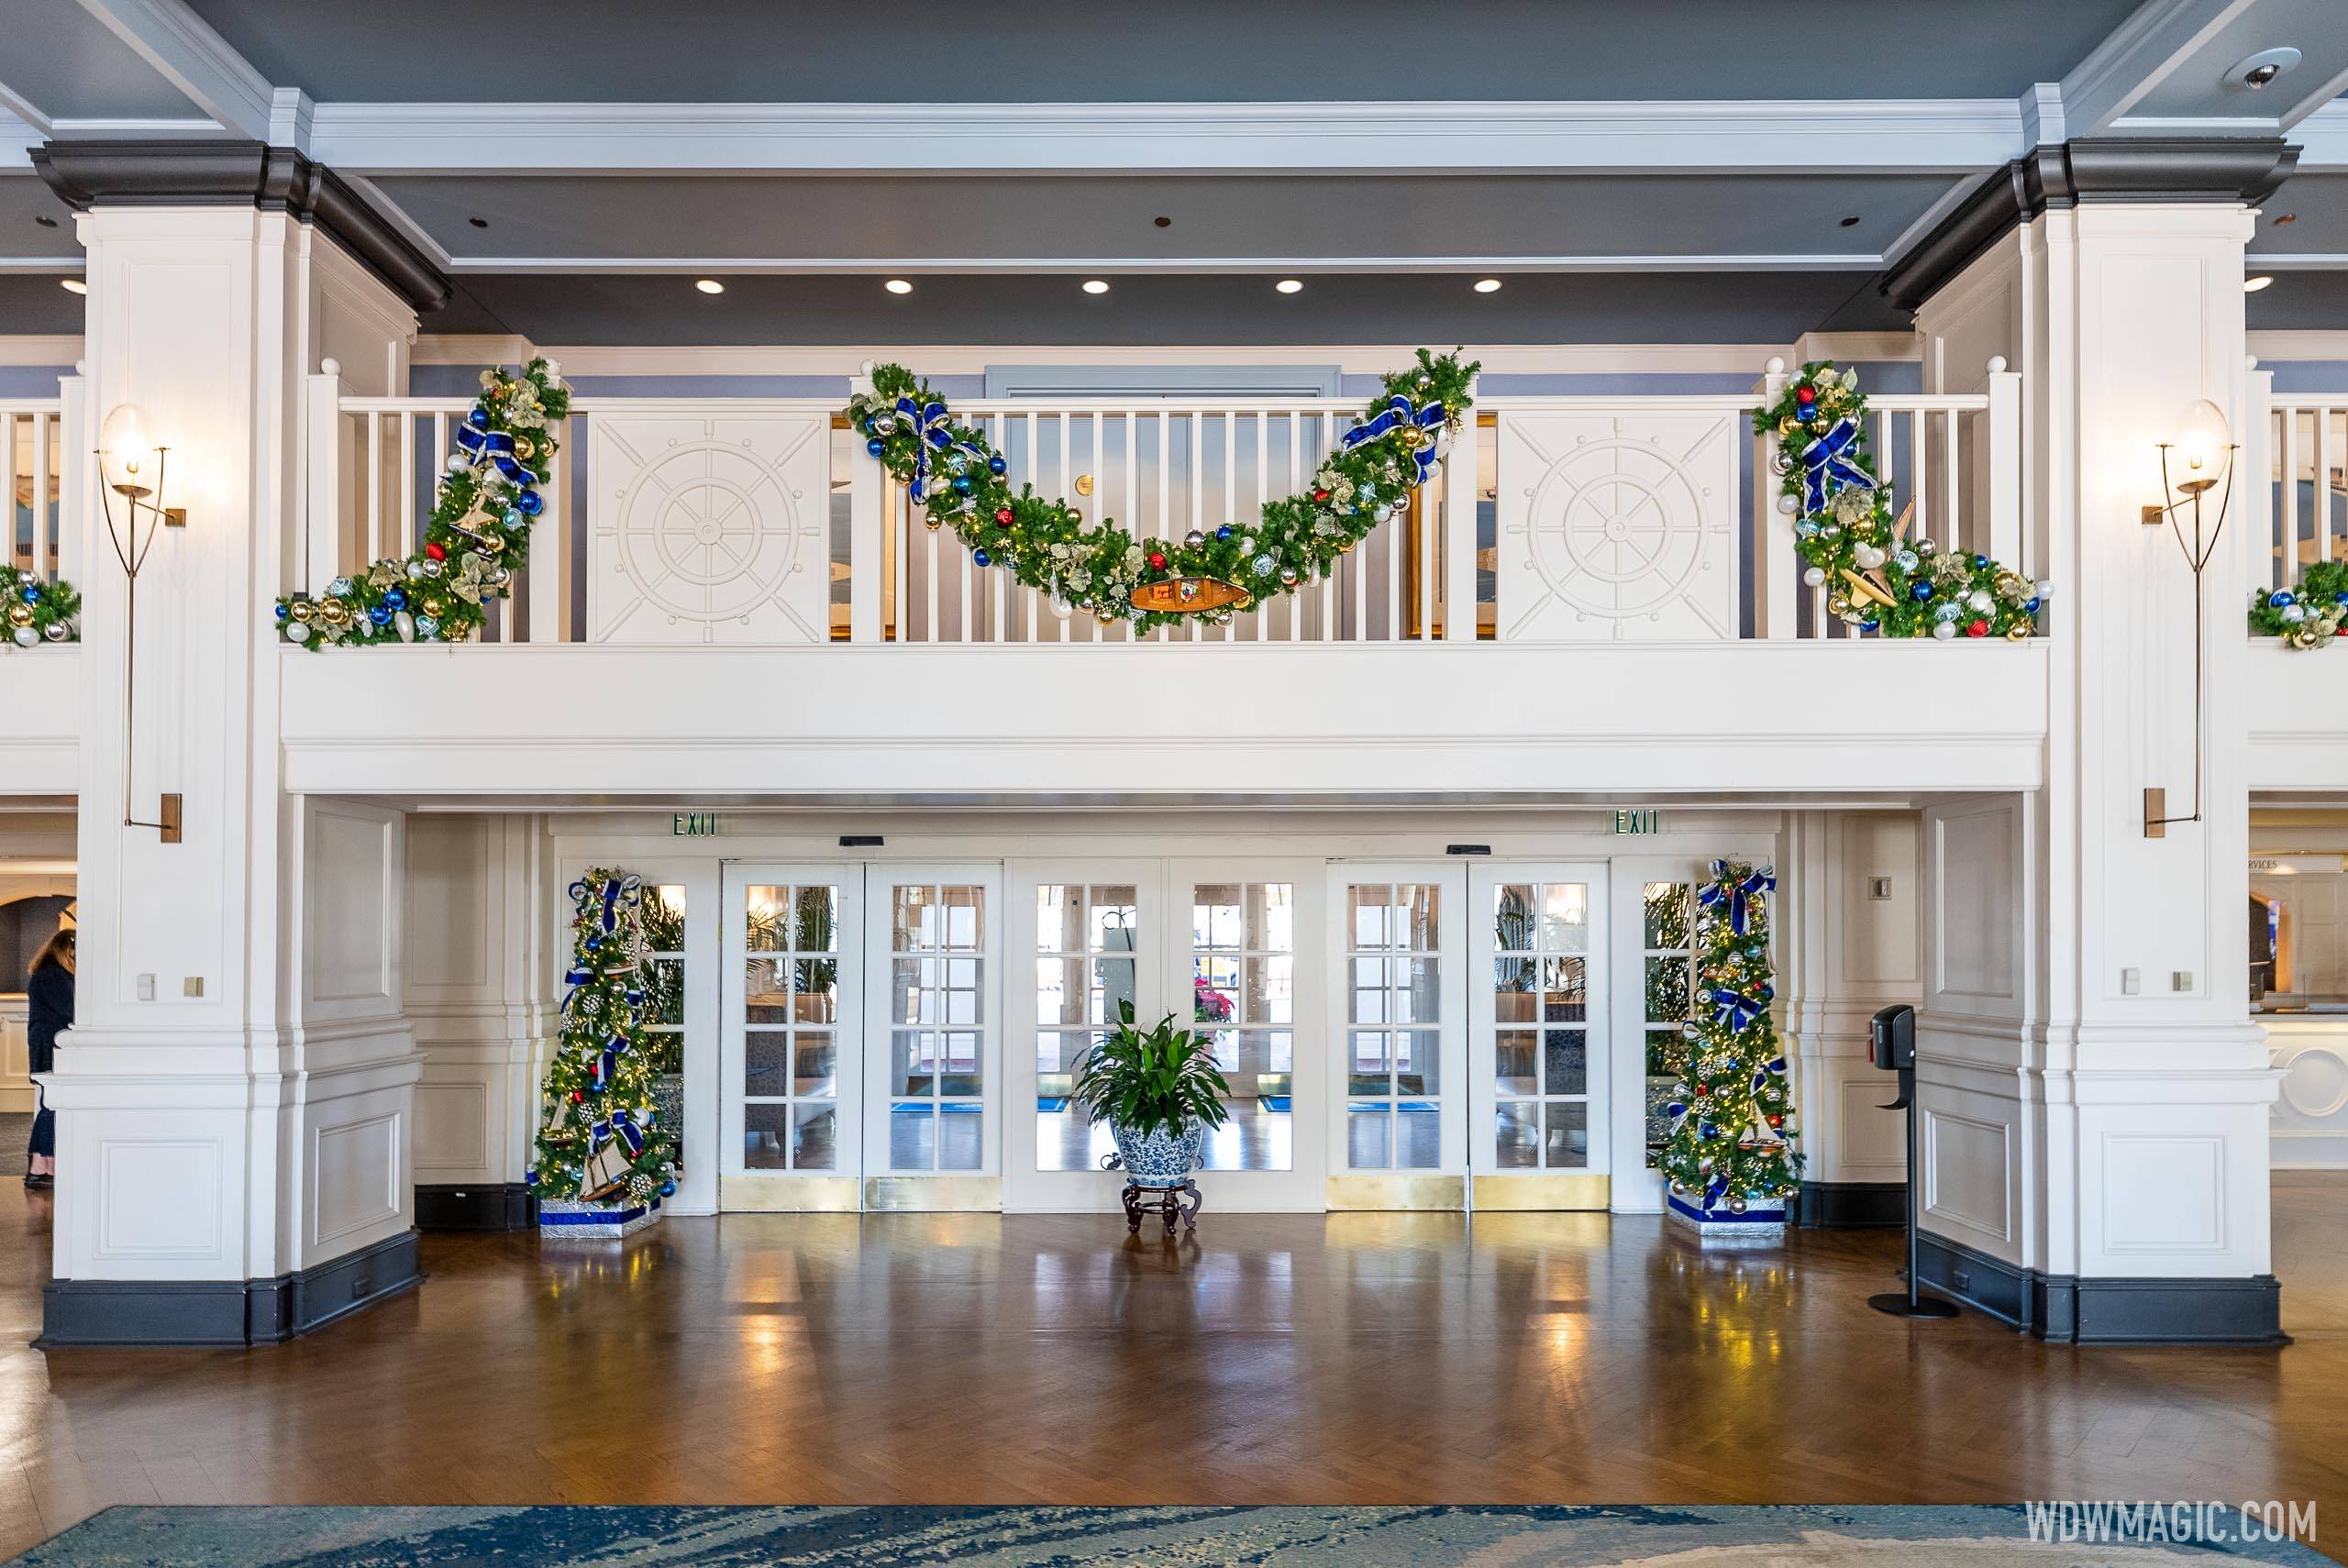 Small Christmas trees and garland surround the main entrance doors